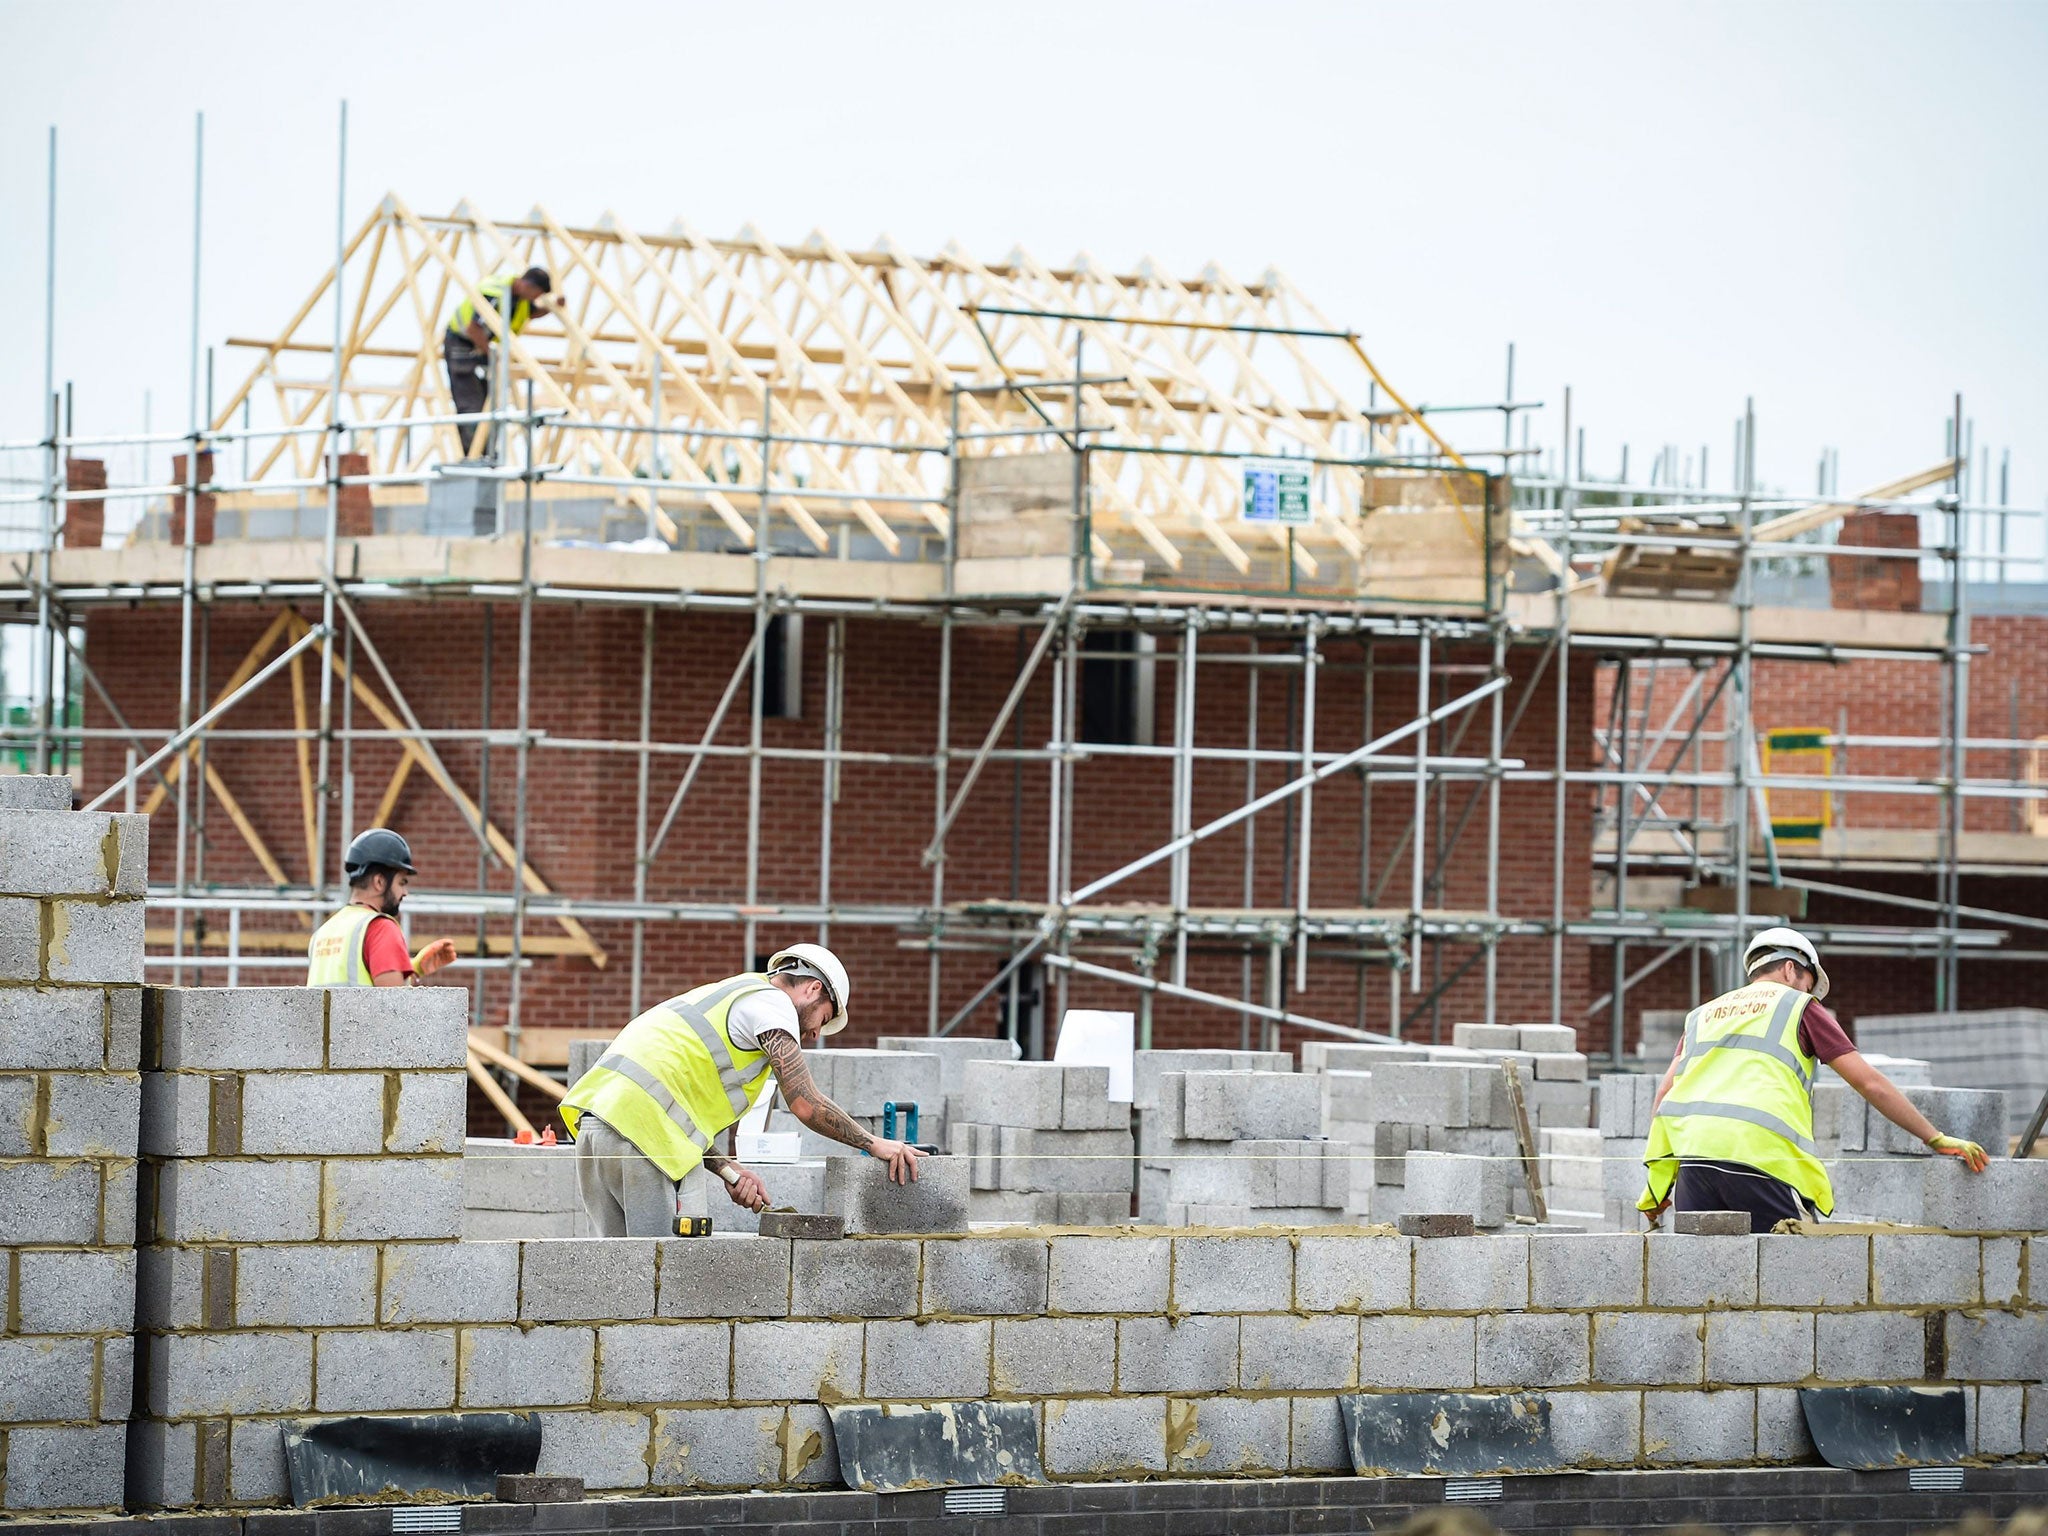 8 per cent of the UK’s construction workers are EU nationals